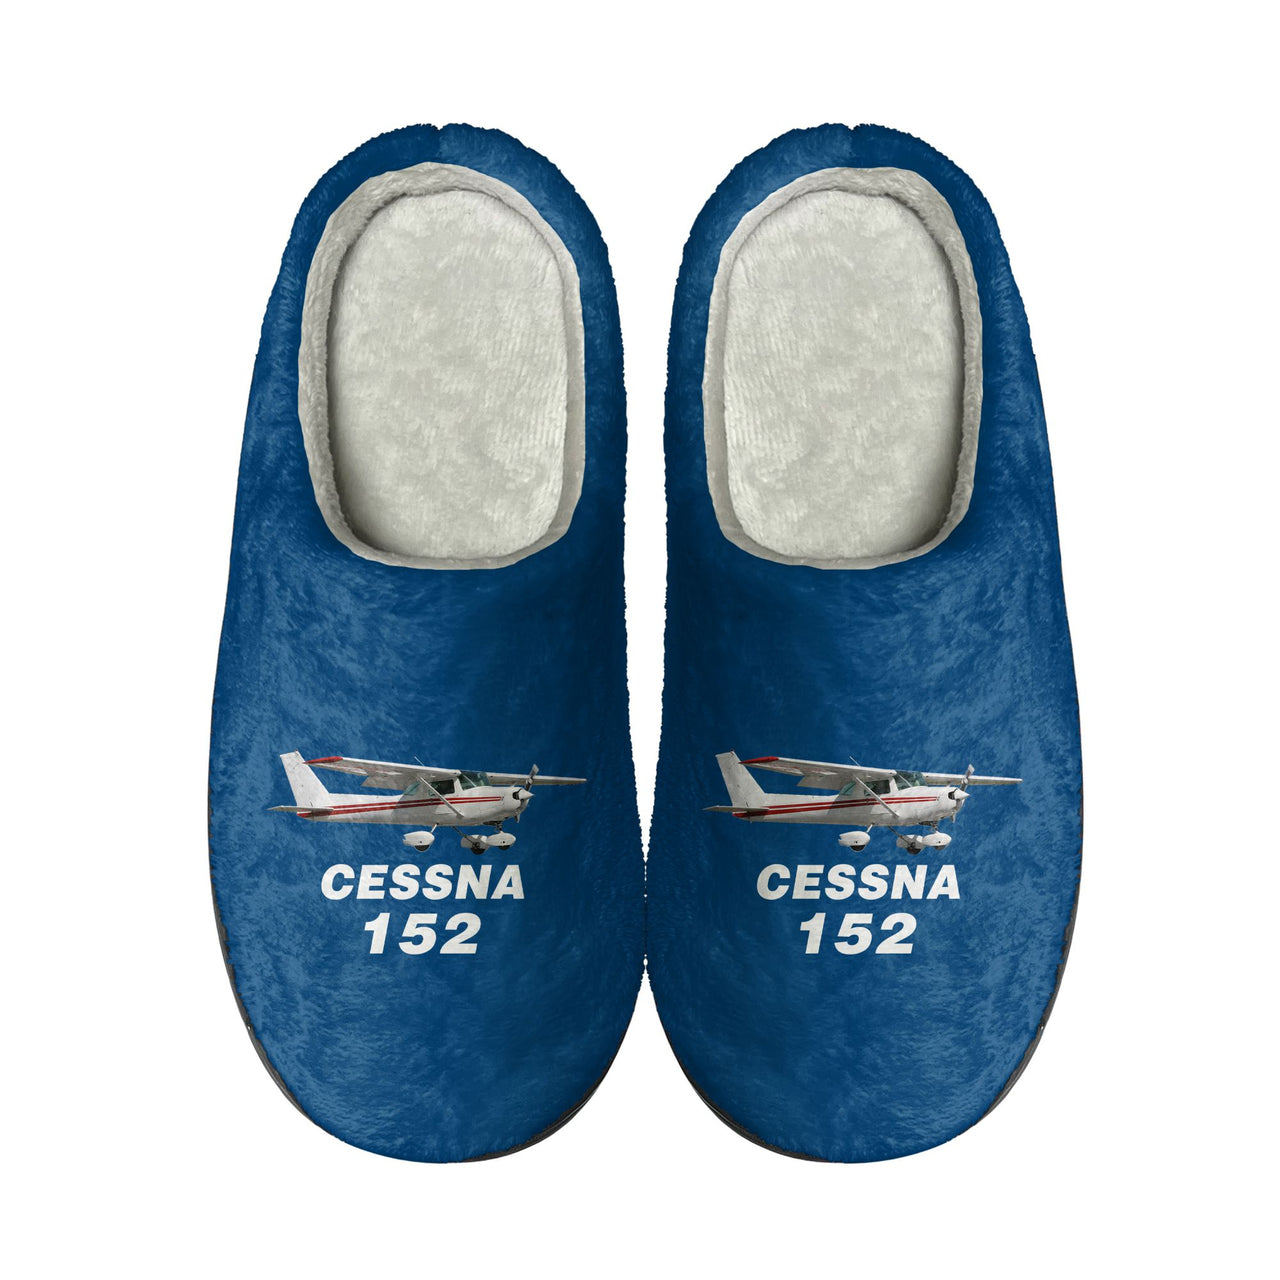 The Cessna 152 Designed Cotton Slippers